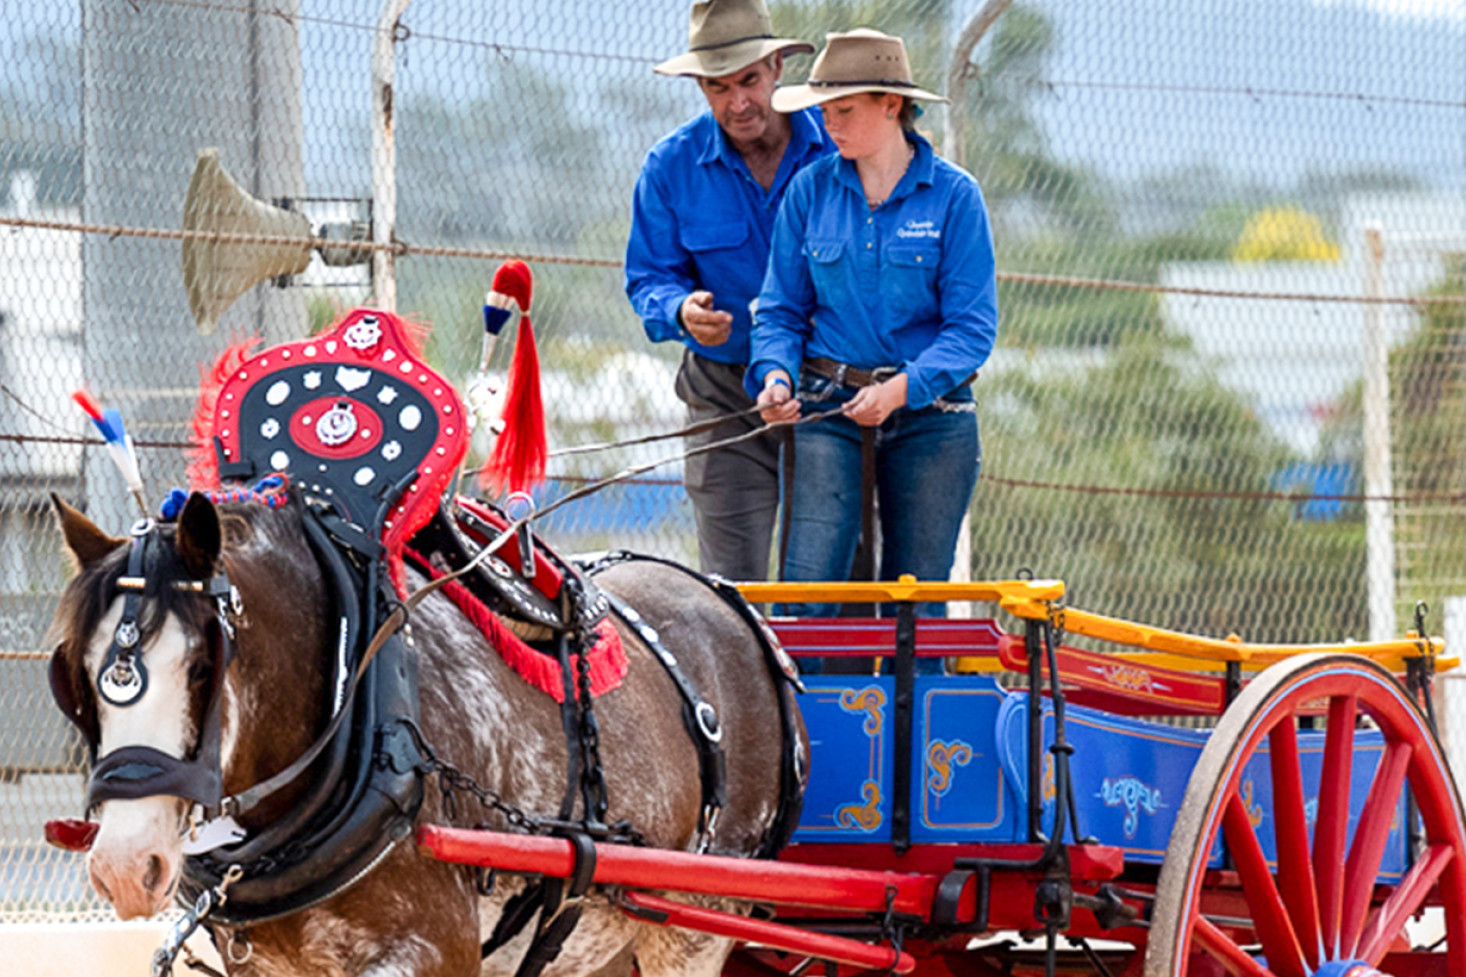 Some of the action from last year’s Gatton Heavy Horse Field Days.